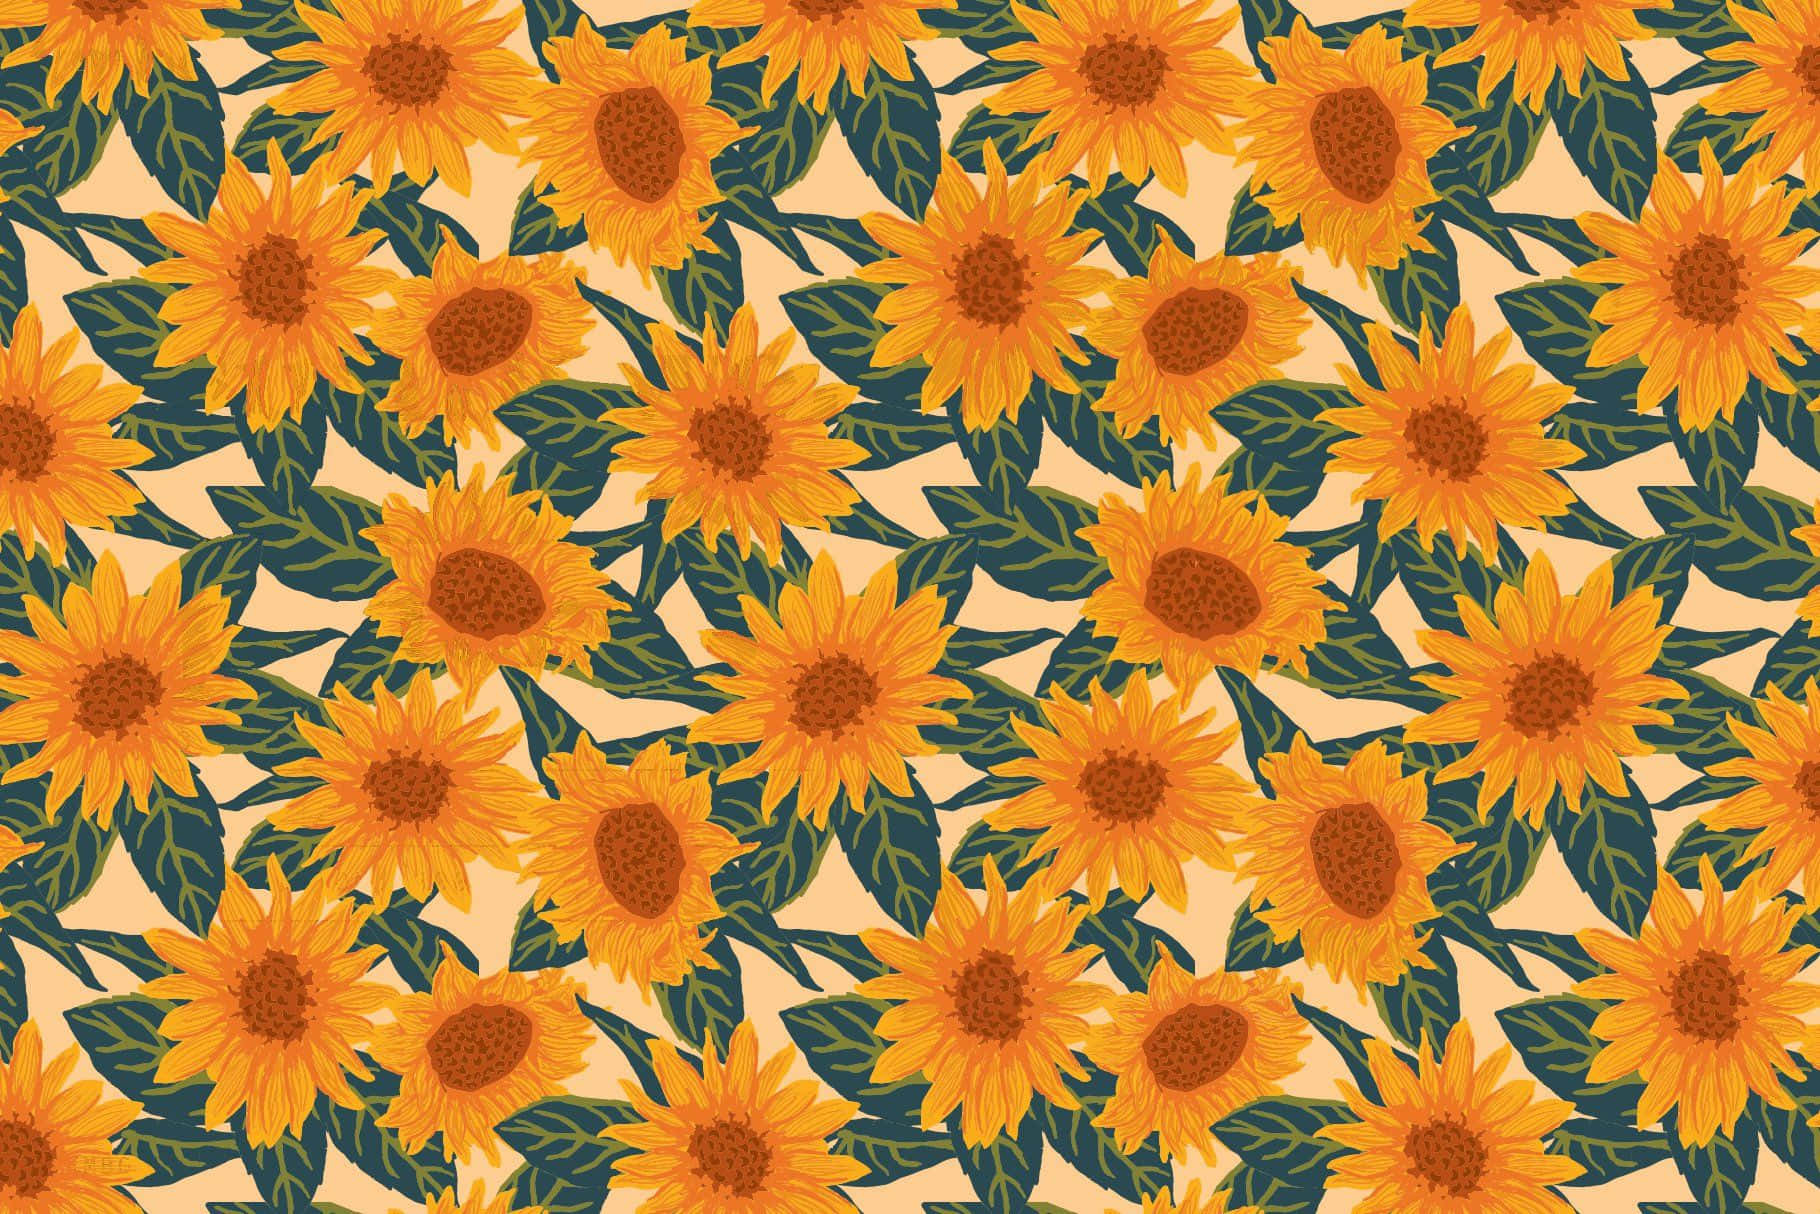 sunflowers on a beige background